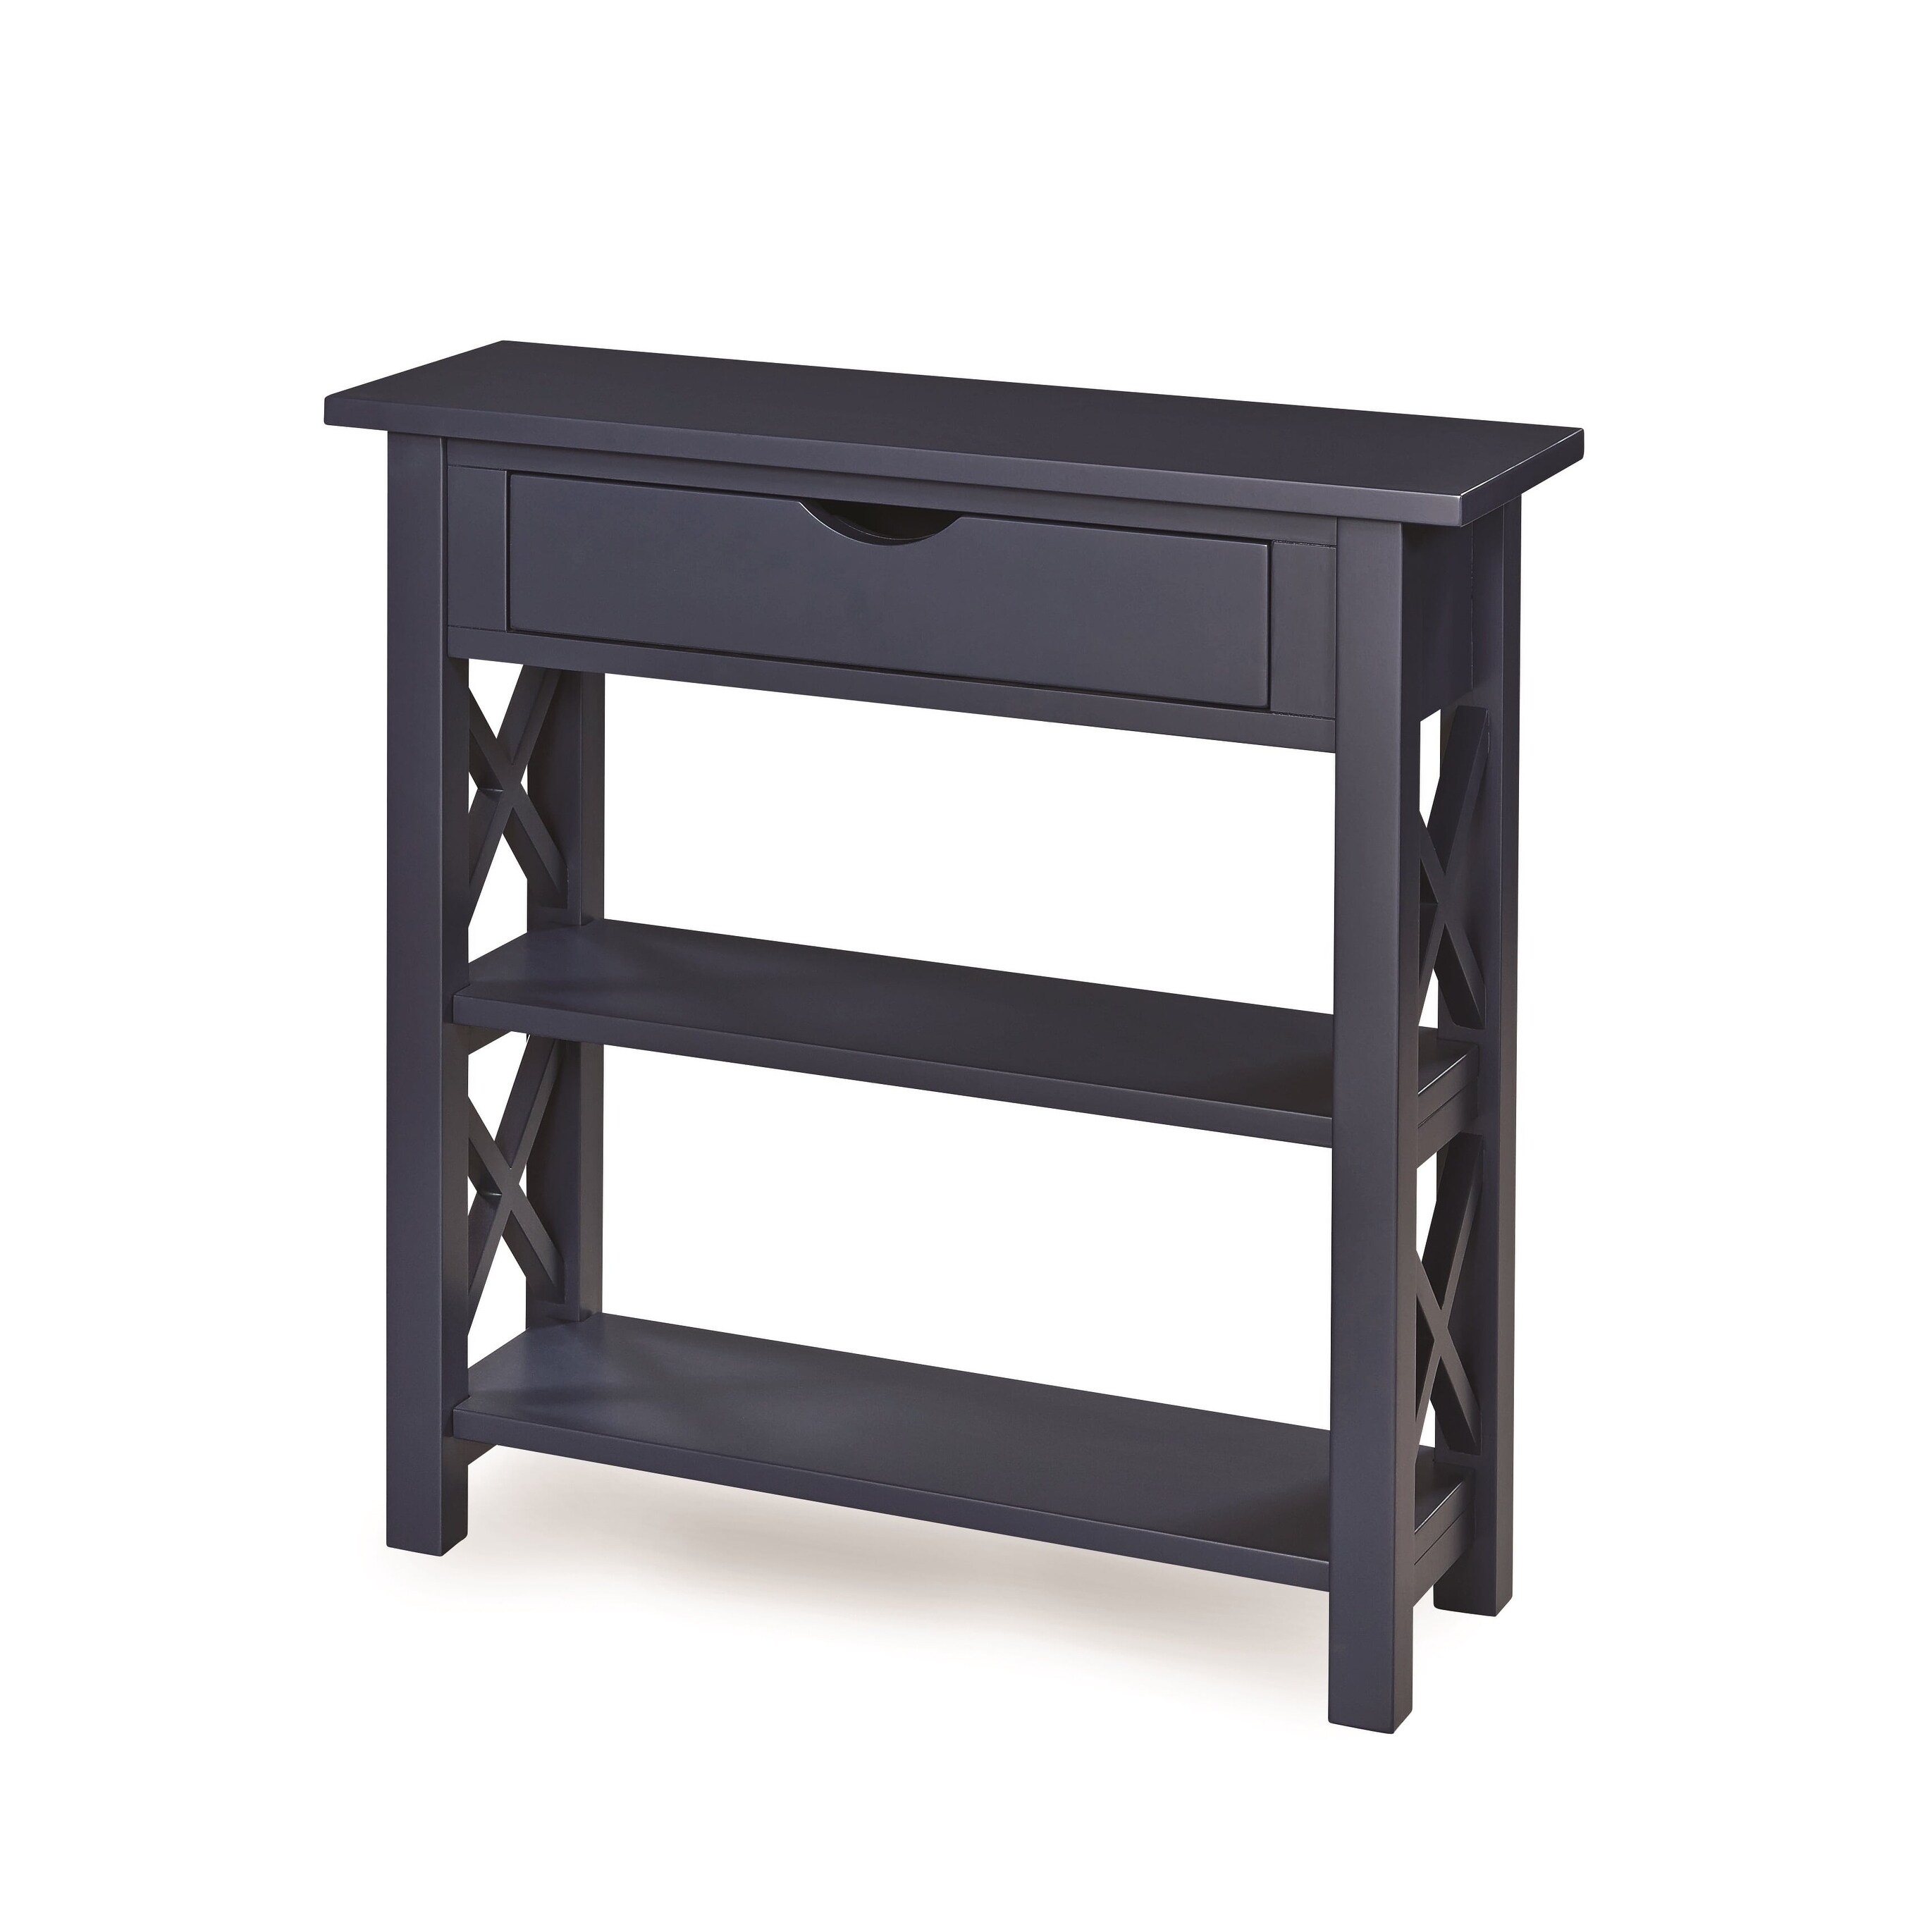 Shop Solid Wood Small Console Table On Sale Overstock 28736776